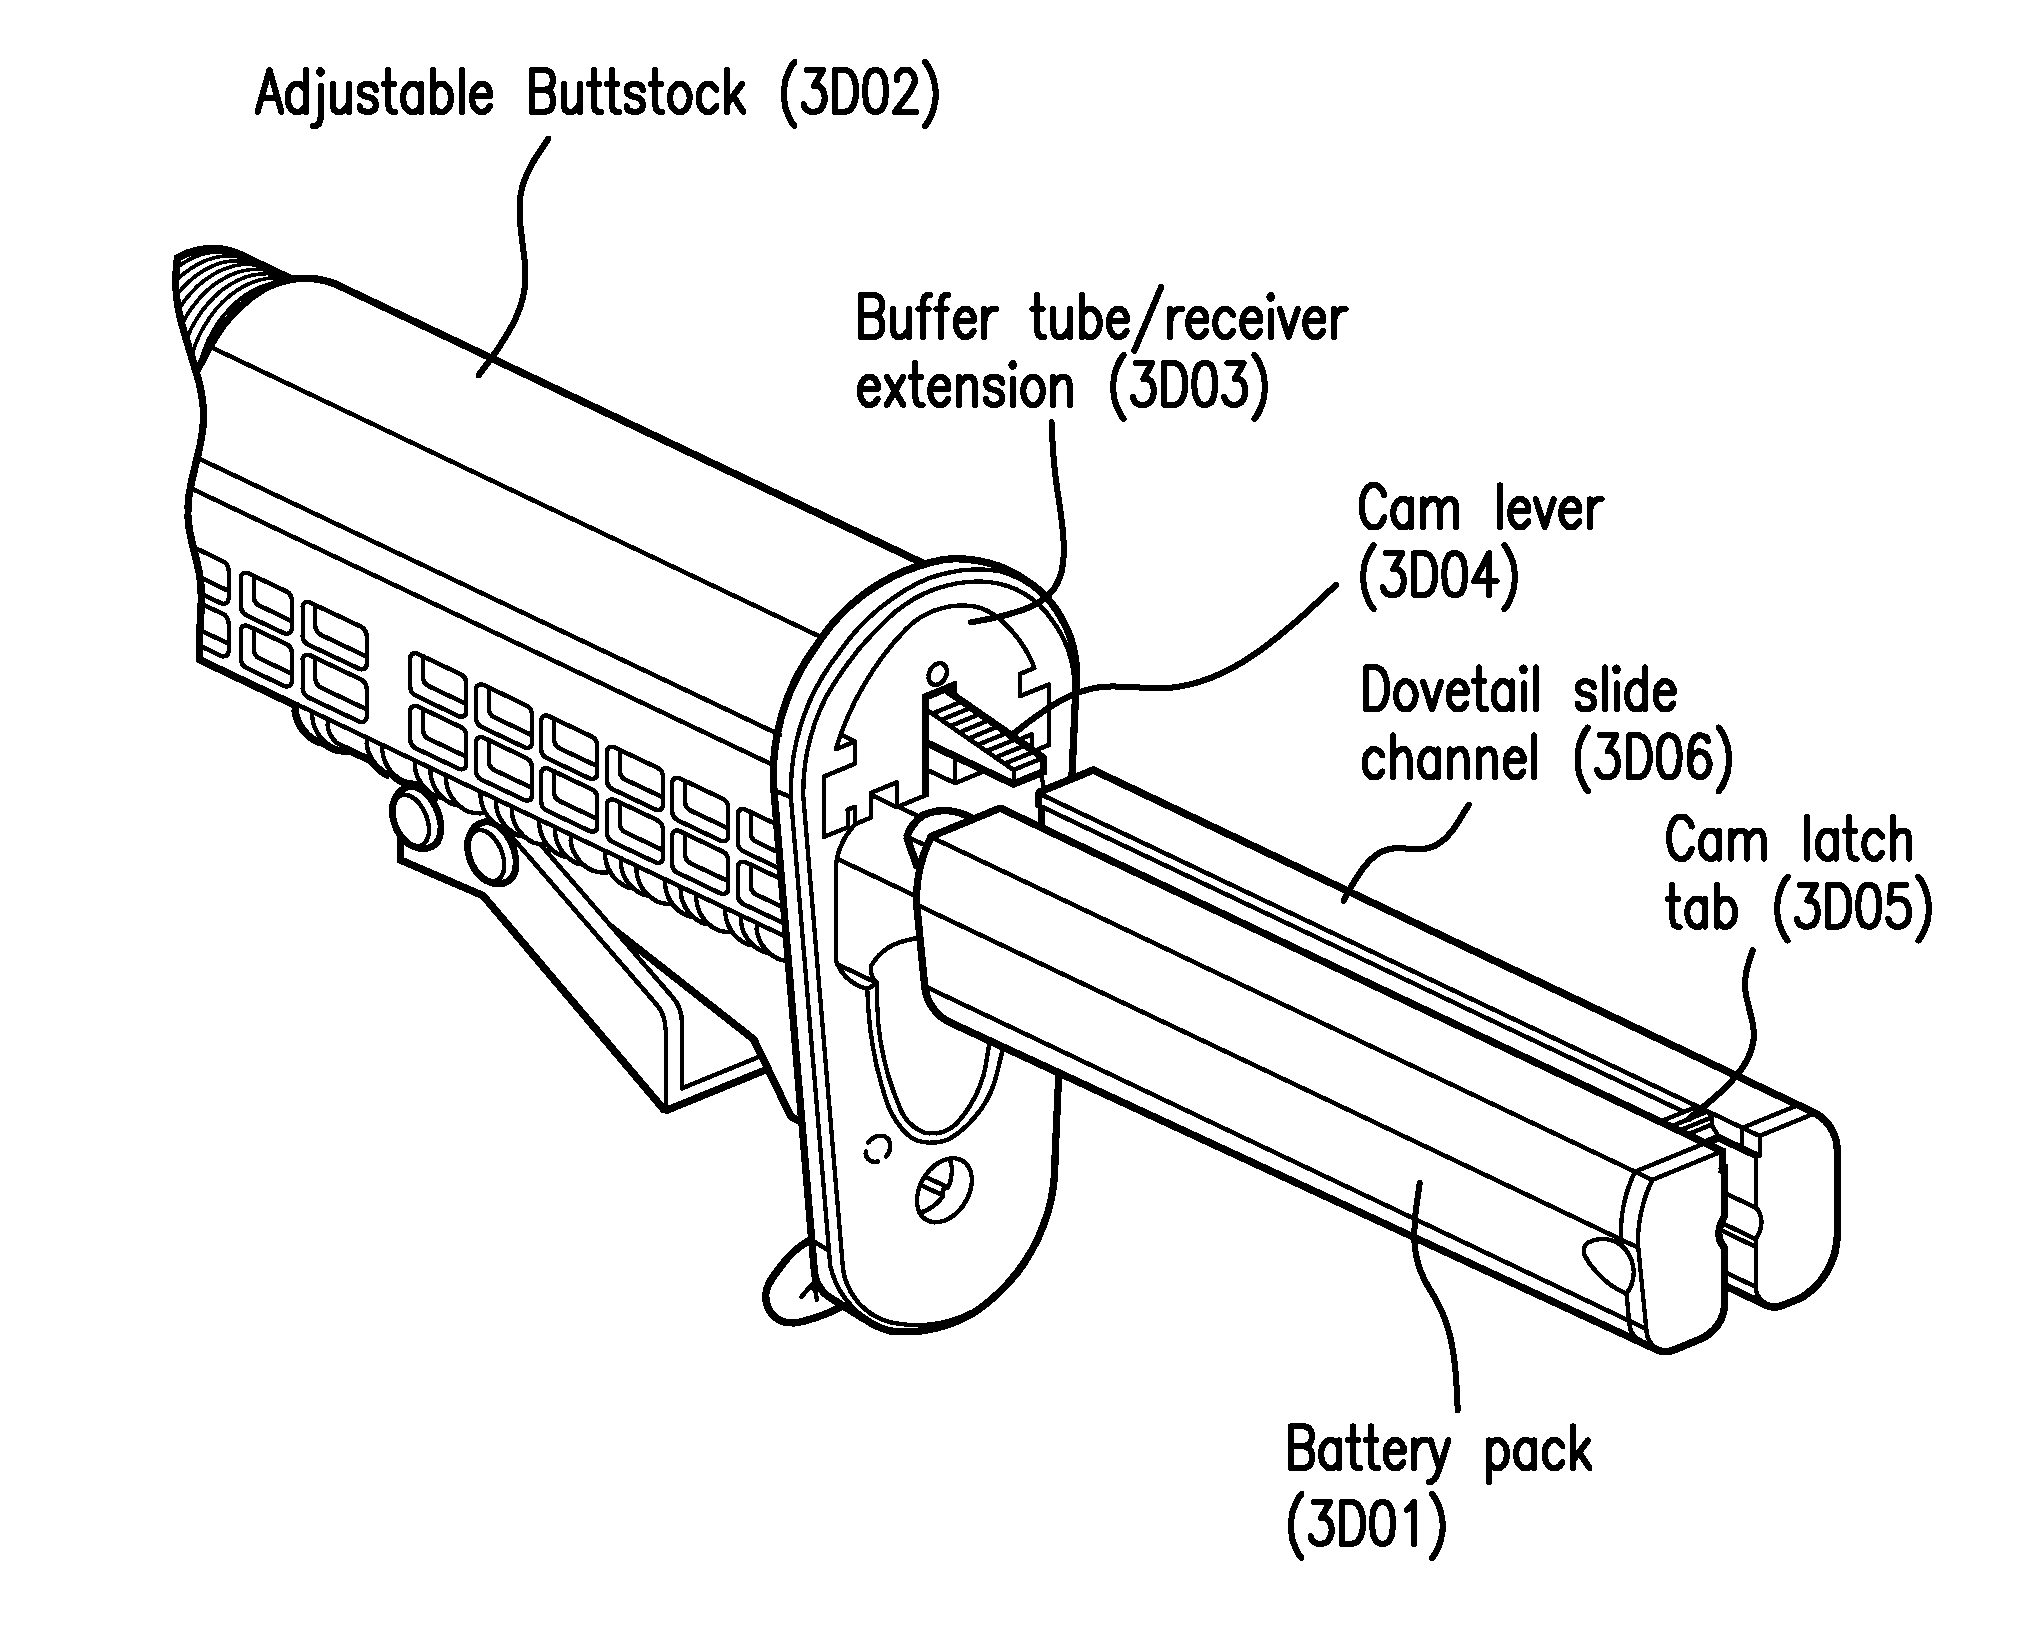 Rifle accessory rail, communication, and power transfer system-battery pack